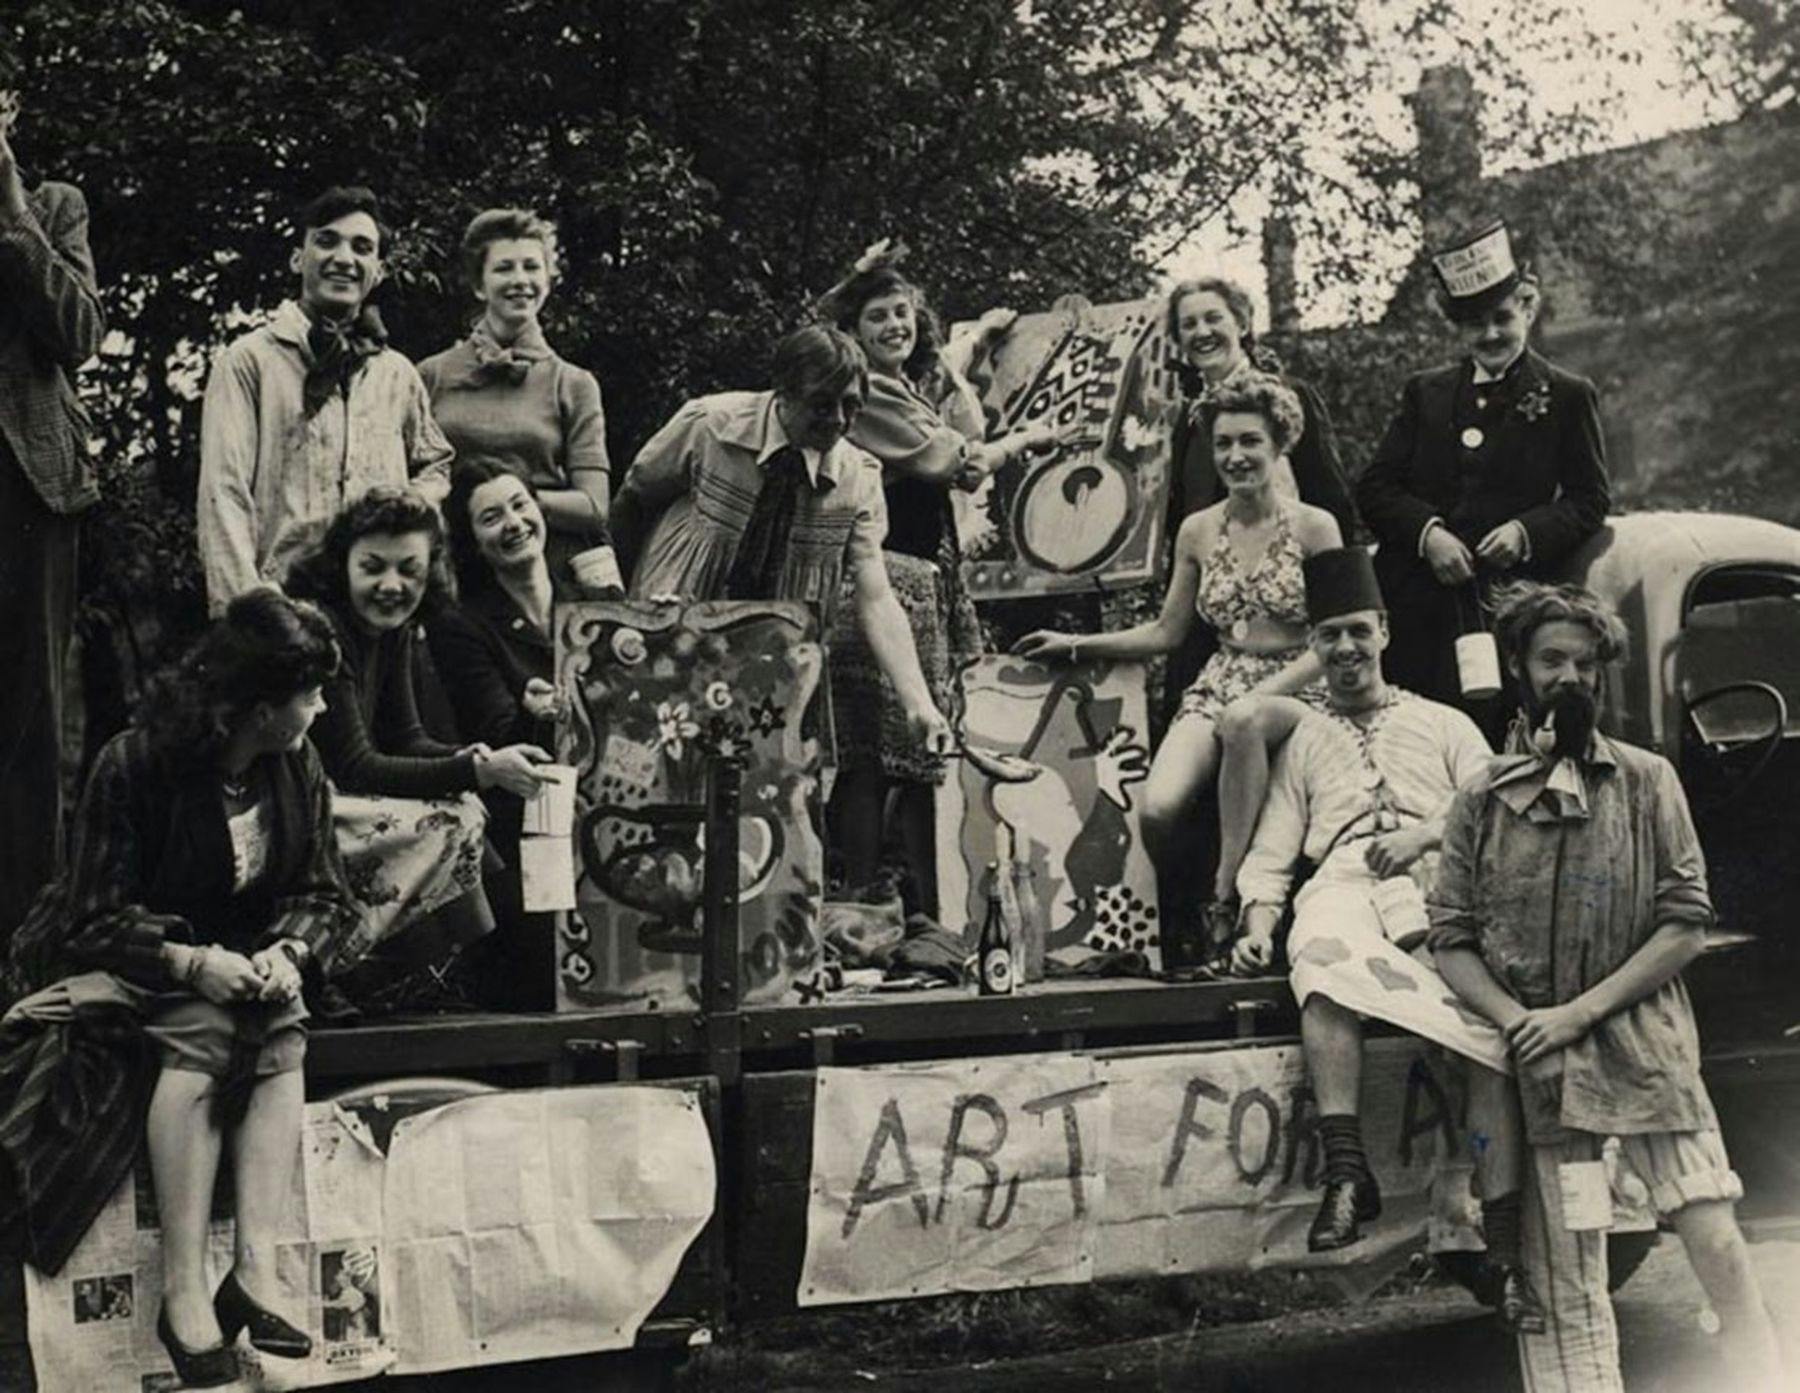 Rag Day 30 June 1946. Amongst the students are: Joyce Fountain, Ray Garstang, Peggy, Lesley, Ken Lockwood, Mary Payne, Chris Morris, Olga Platte. Photograph courtesy of Margaret Bostwick who attended from 1946-51.